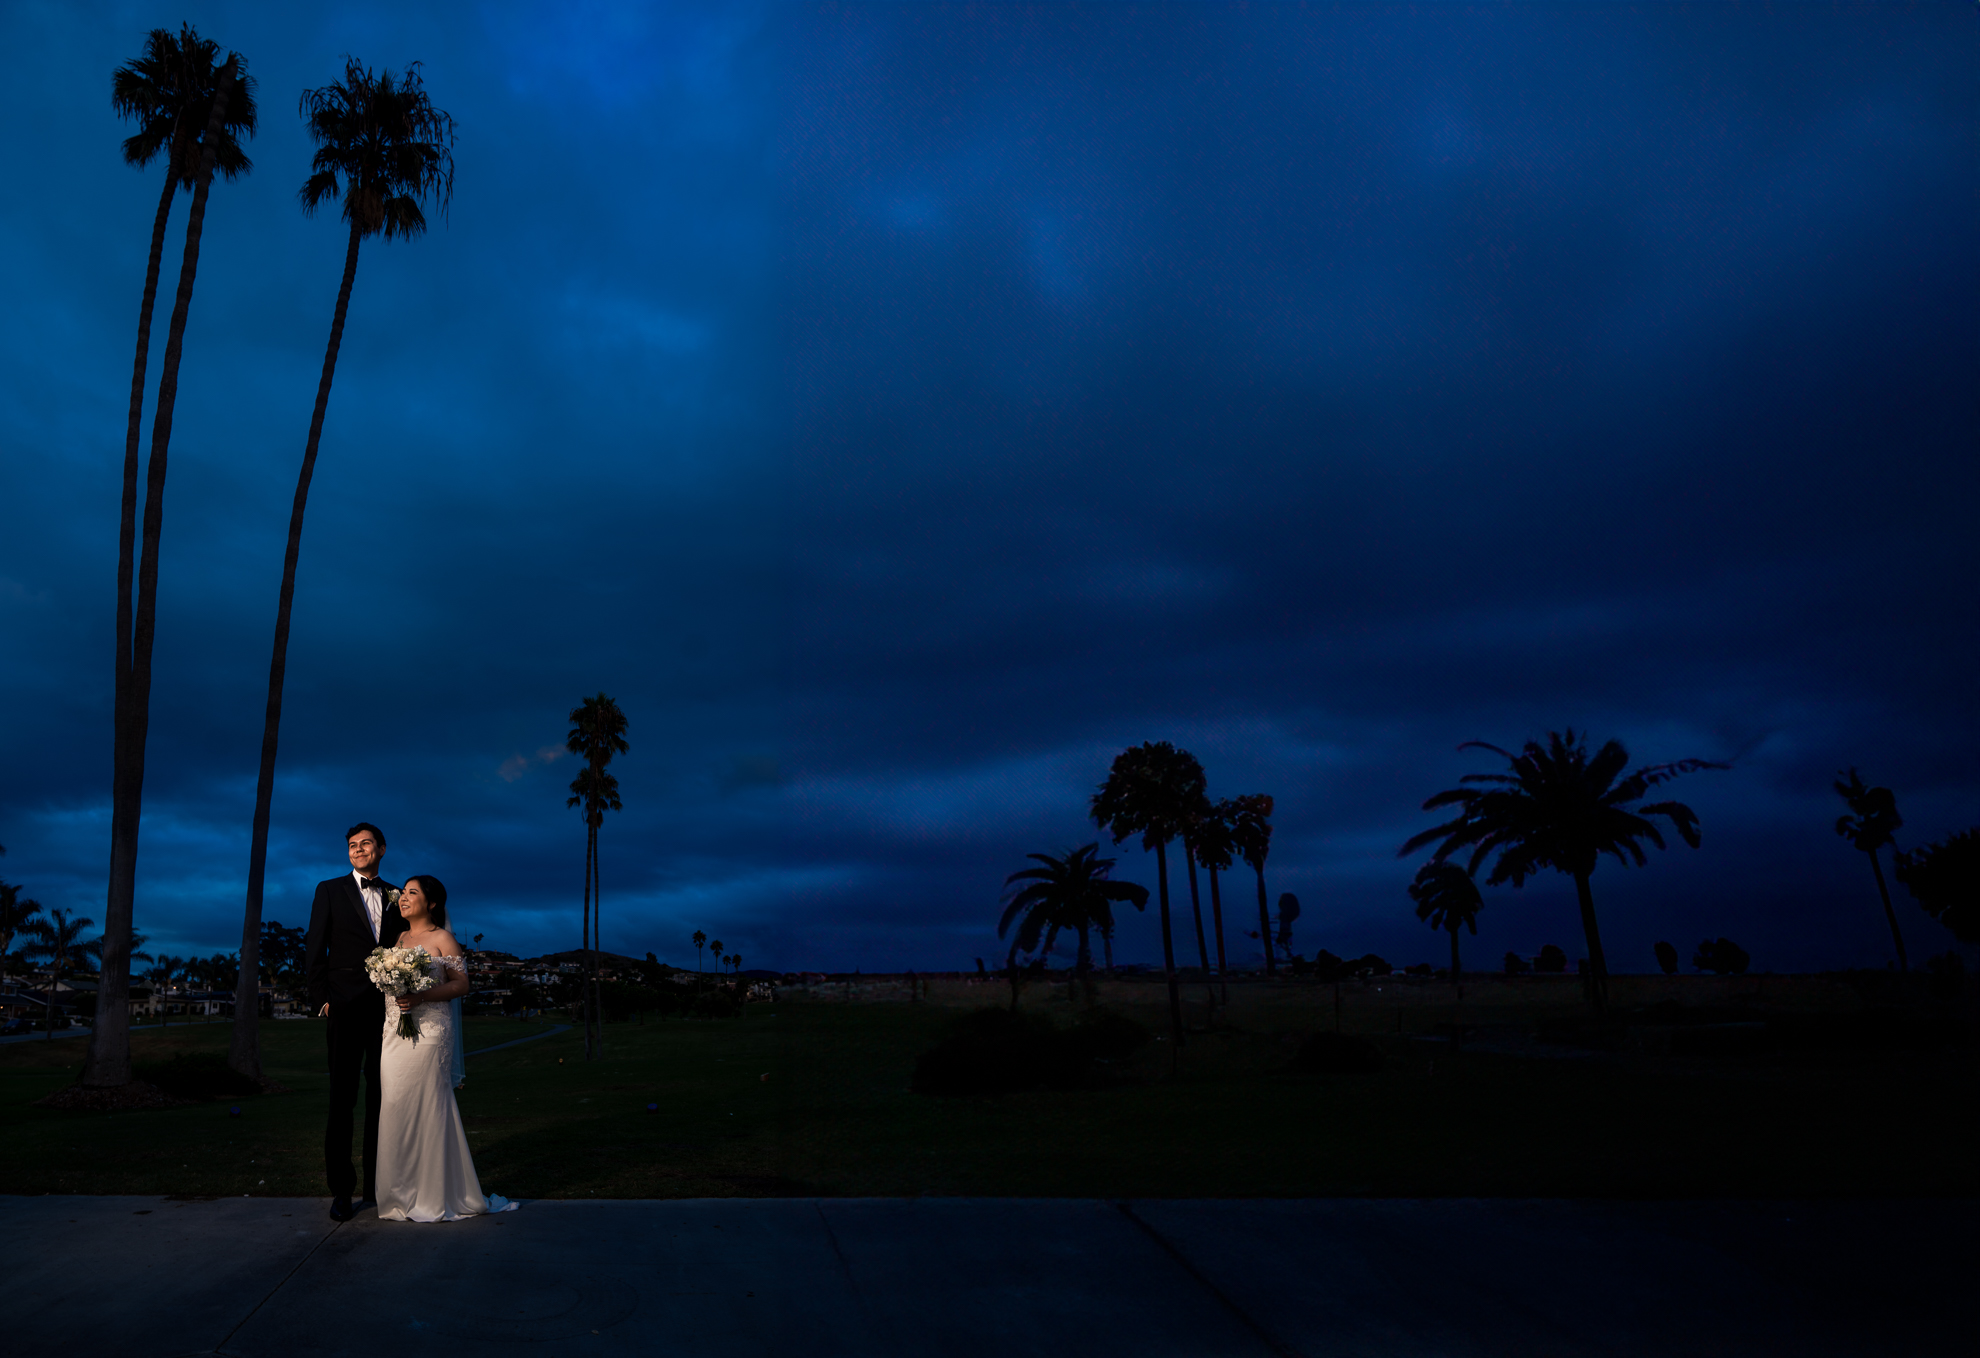 A bride and groom standing in front of palm trees at dusk.